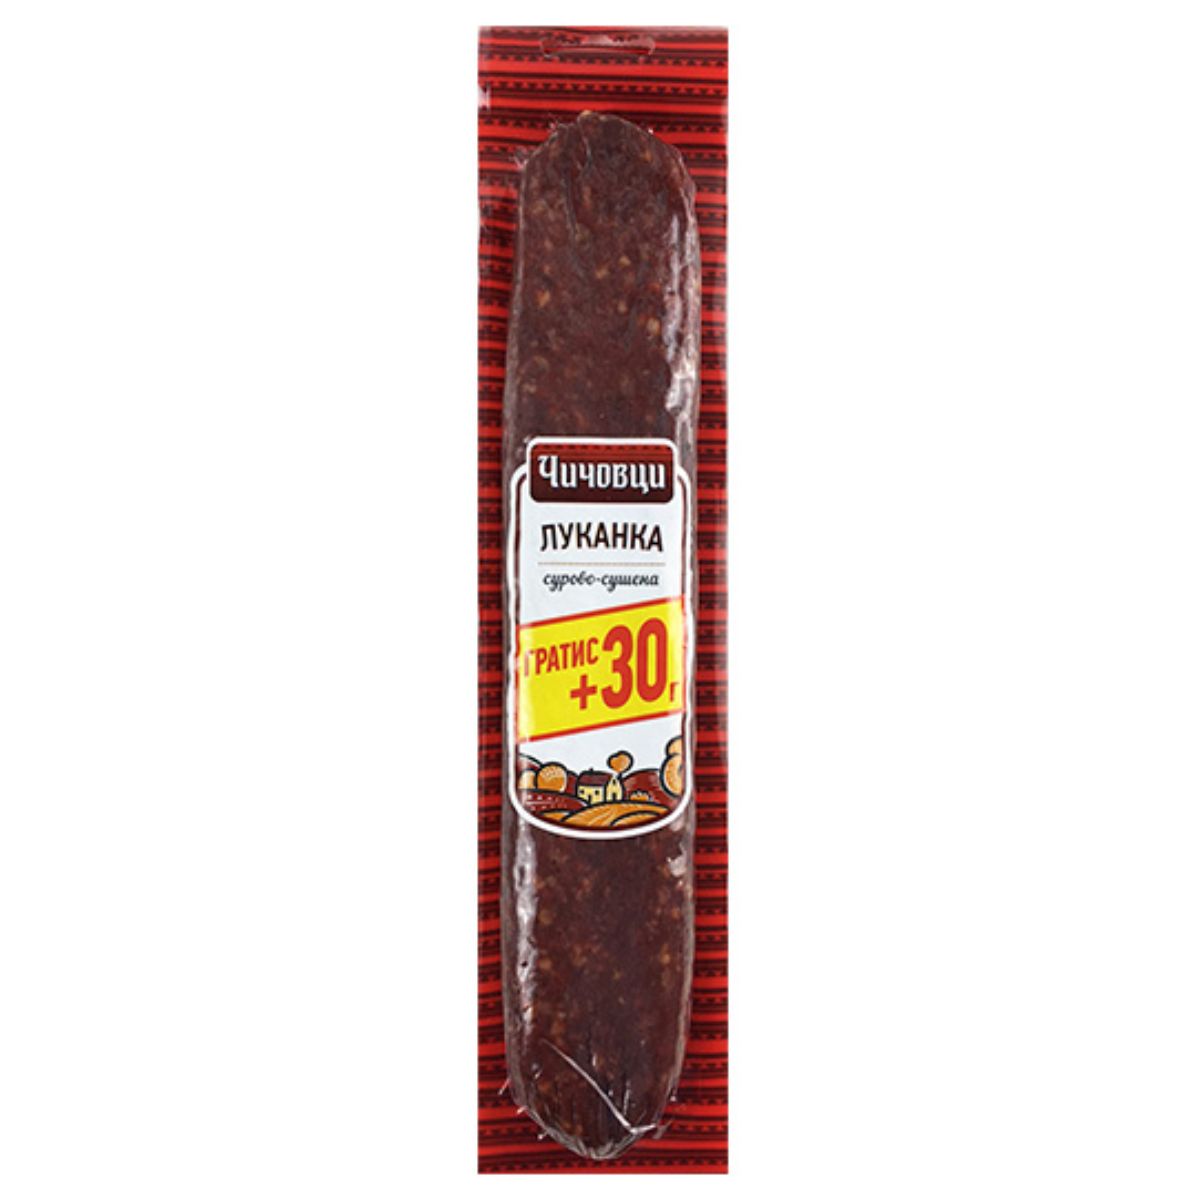 A Boni - Lukanka Sausage in a package on a white background.